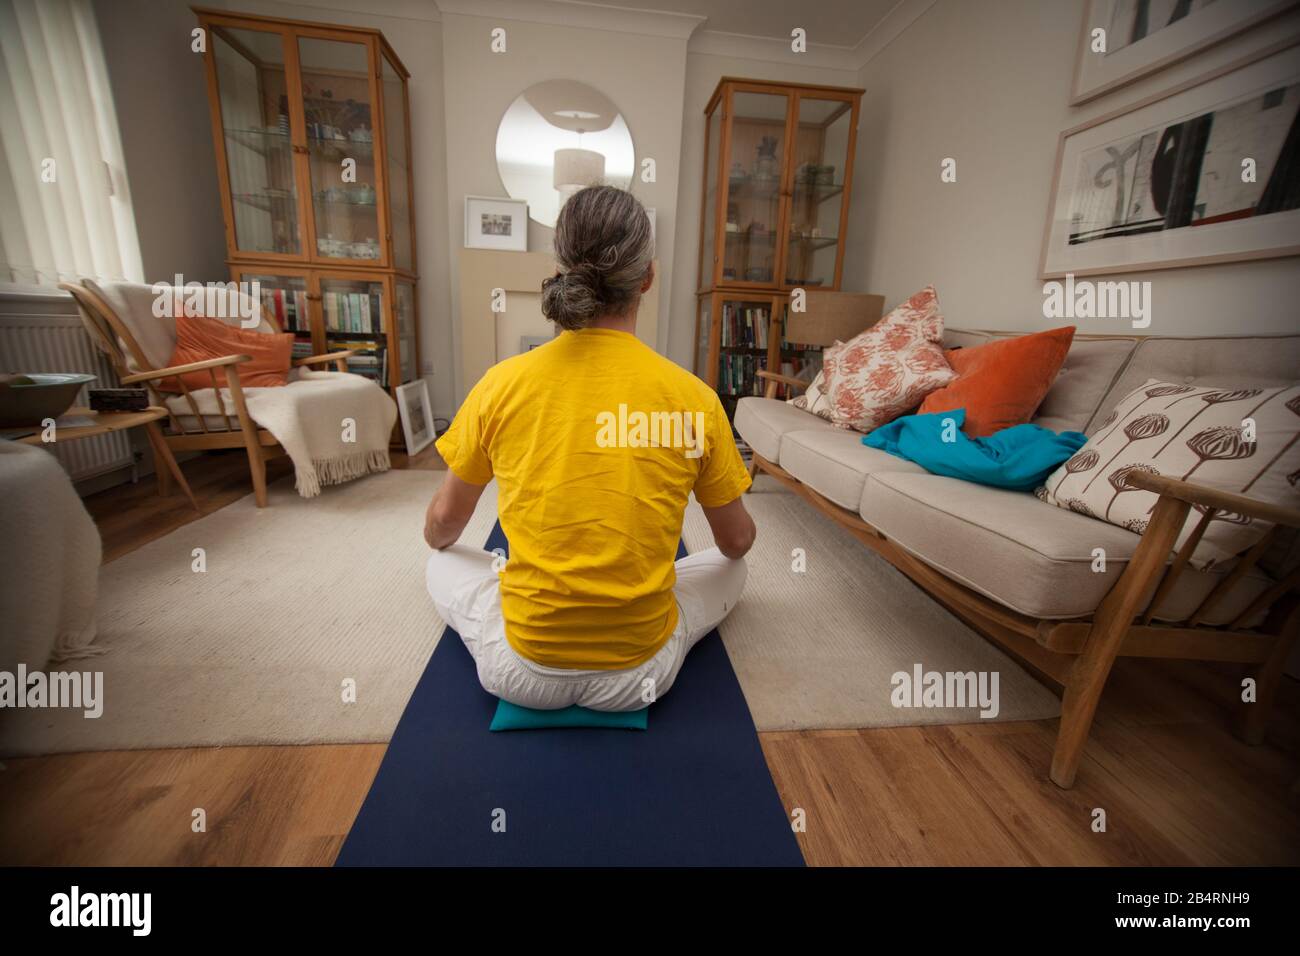 A man meditating as part of his Yoga routine Stock Photo